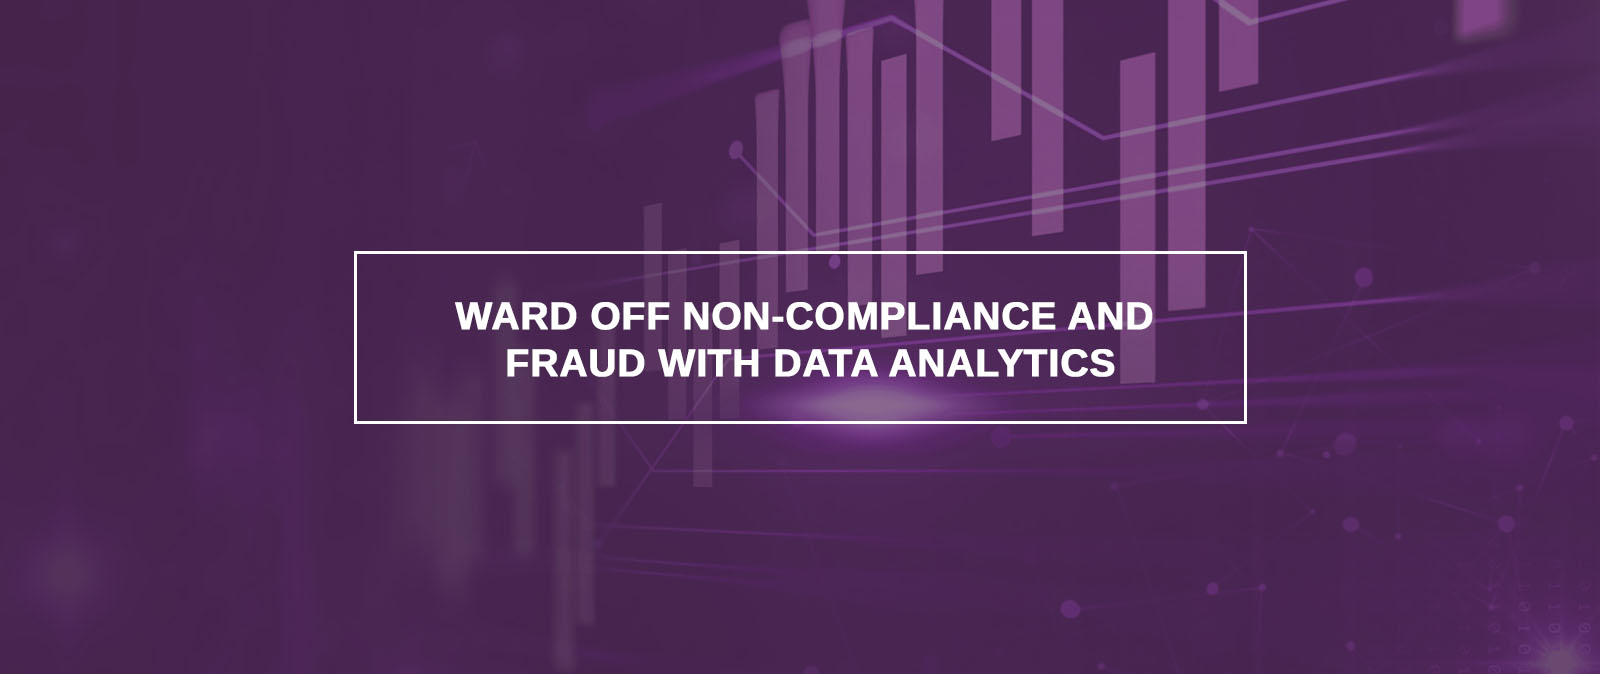 Ward Off Non-Compliance And Fraud With Data Analytics